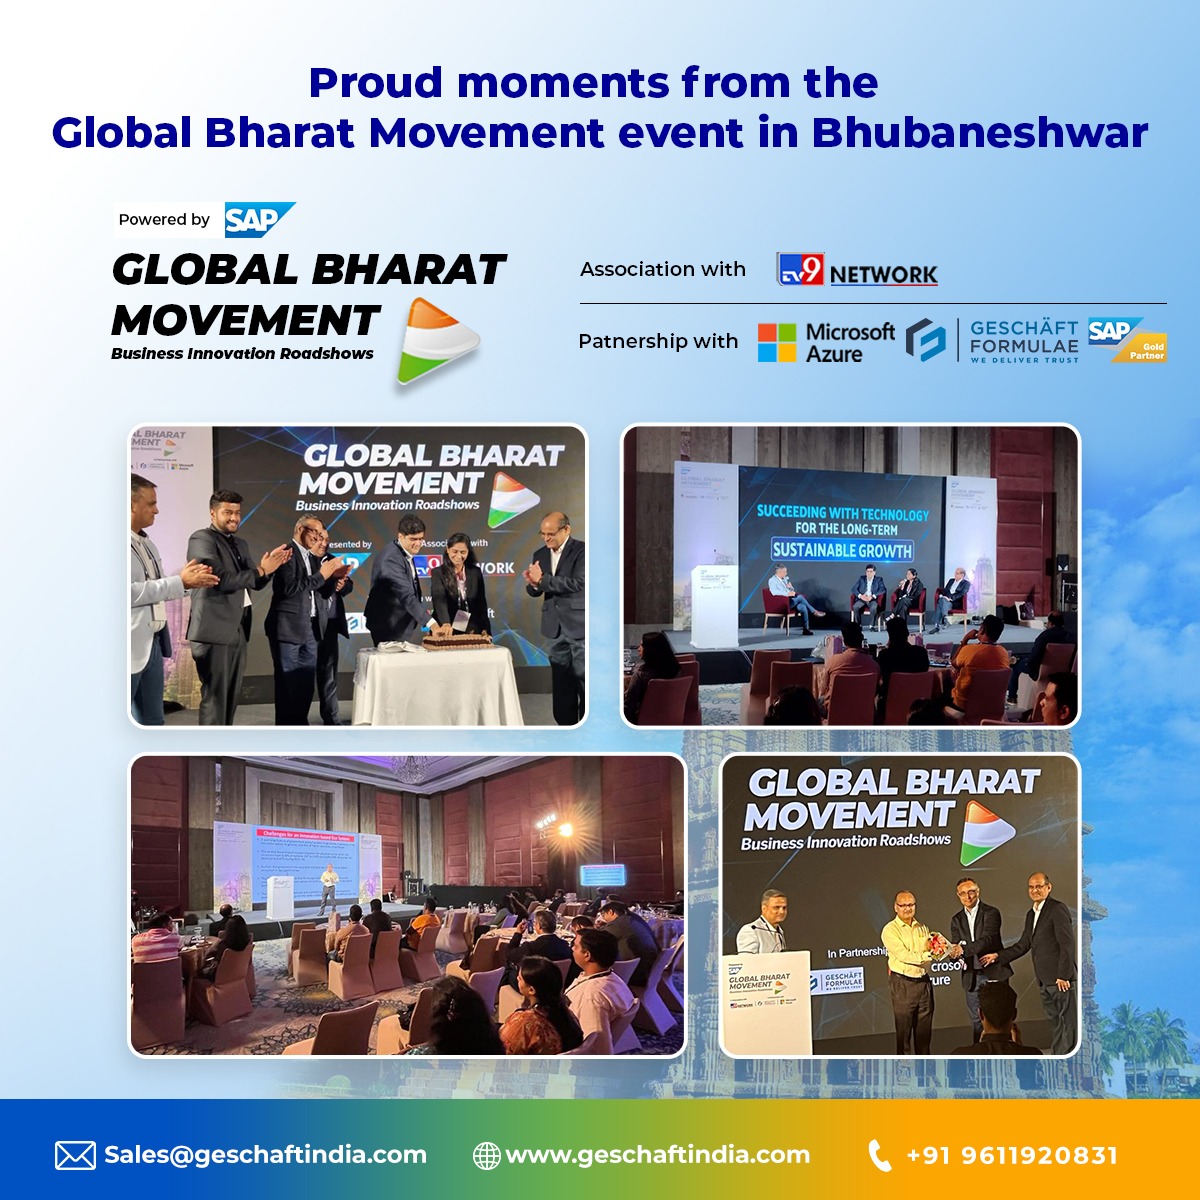 Celebrate the Proud Moments at the Global Bharat Movement! 🎉✨

#GlobalBharatMovement #ProudMoments #BusinessAchievements #Inspiration #FutureLeadership